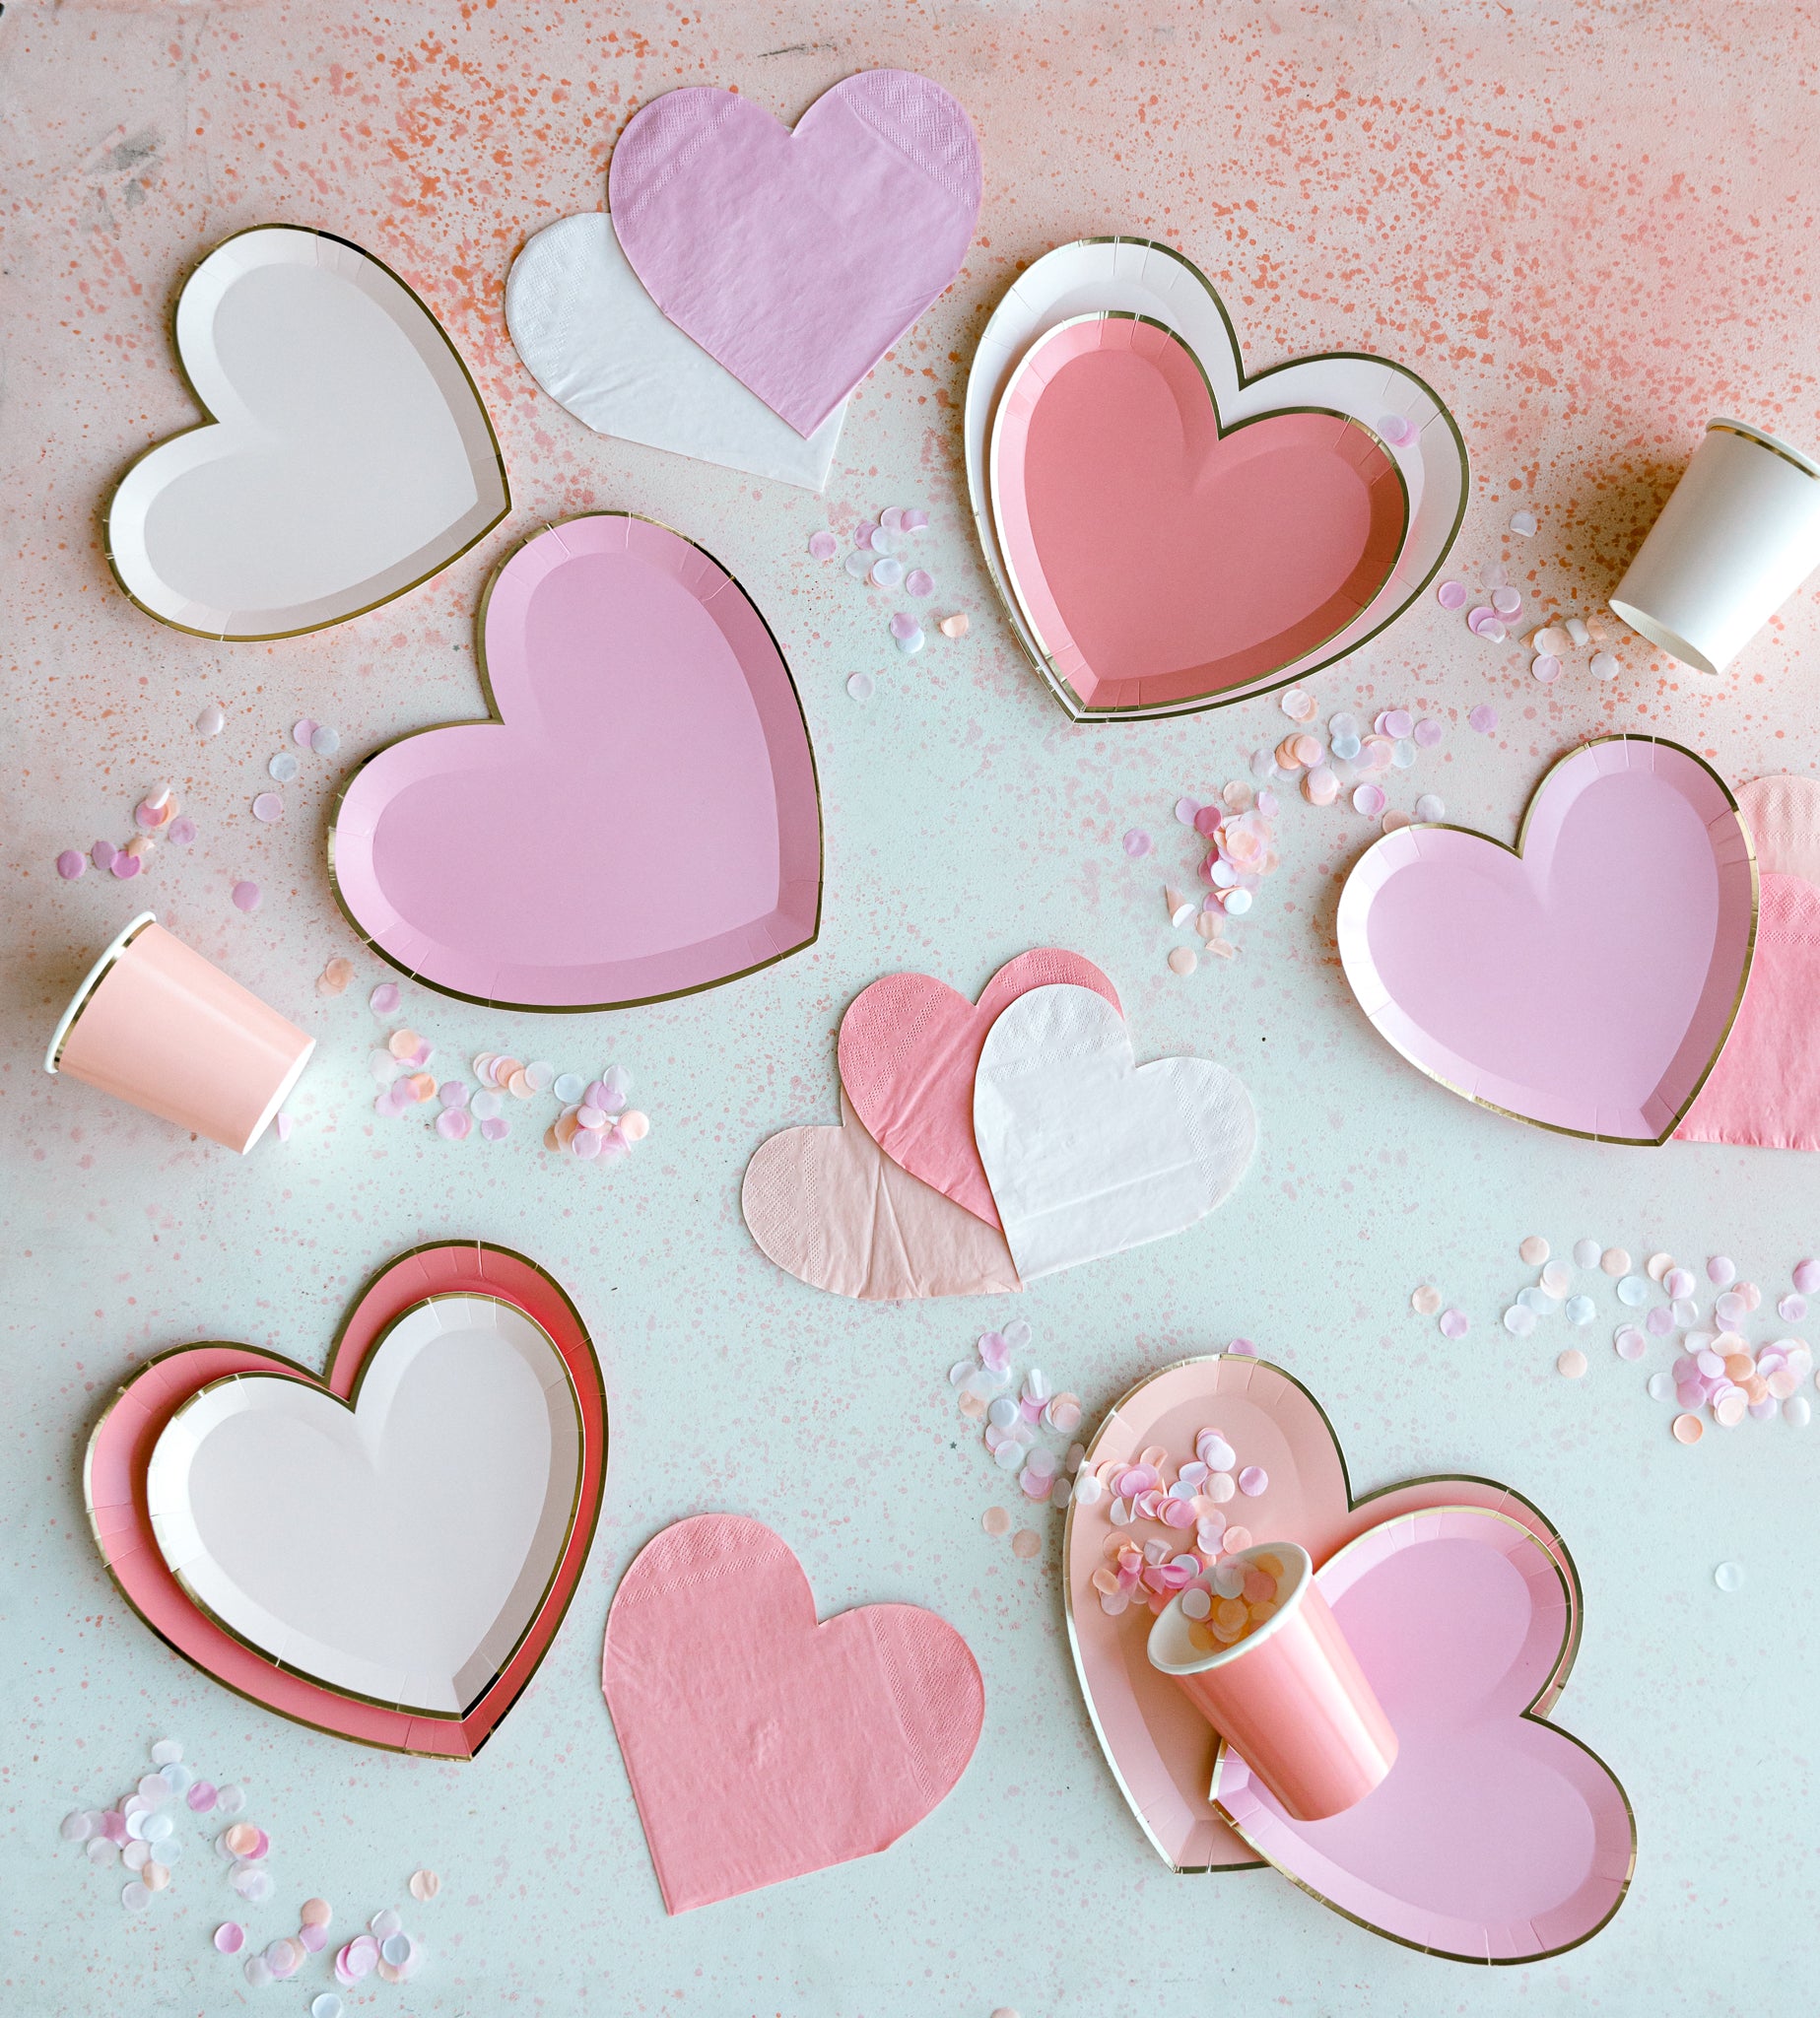 Pink ombre heart plates, cups, and napkins for a Valentine's Day party